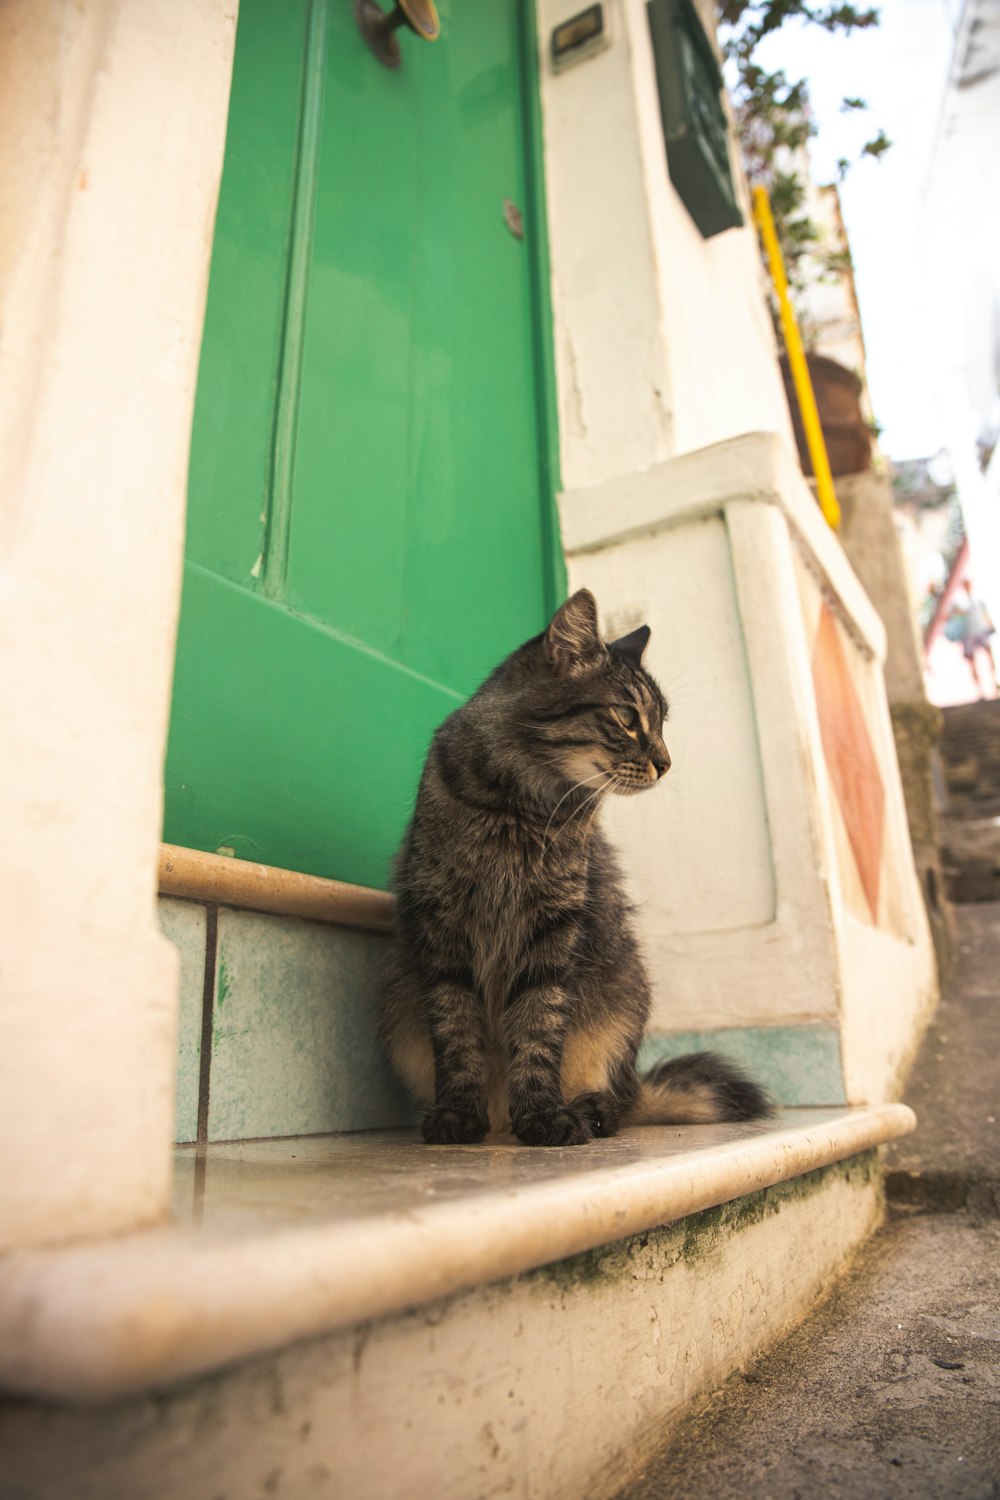 a cat sitting on a step next to a green door